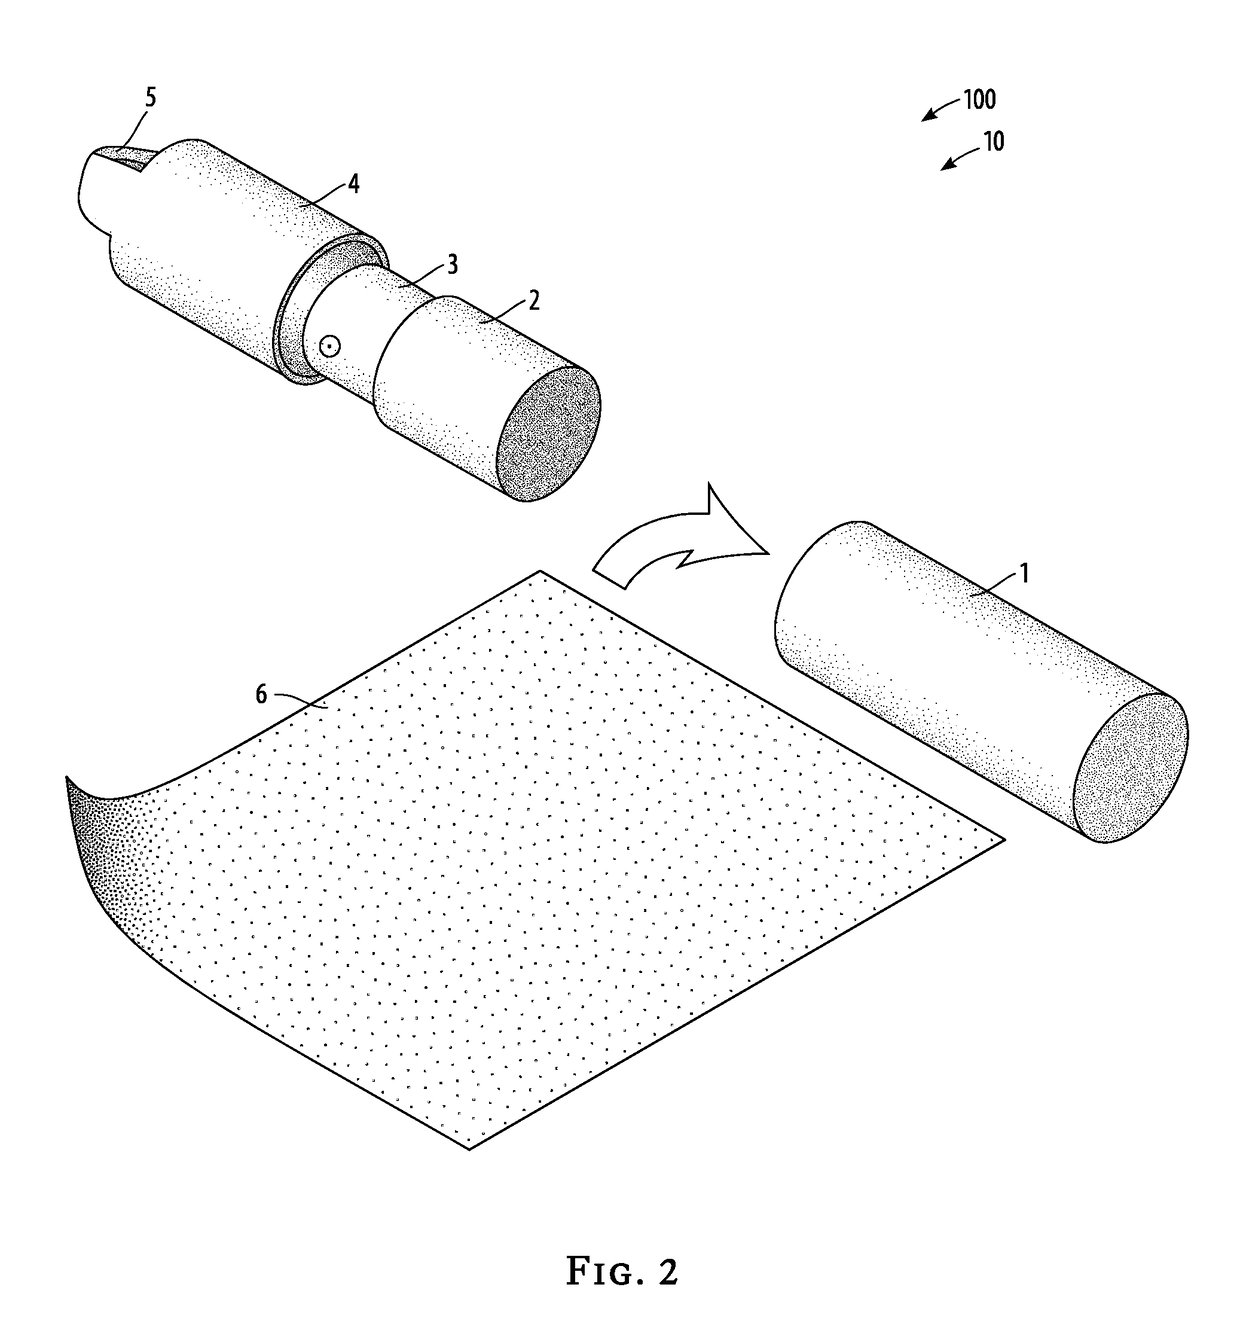 Electronic-device sanitizer product and method